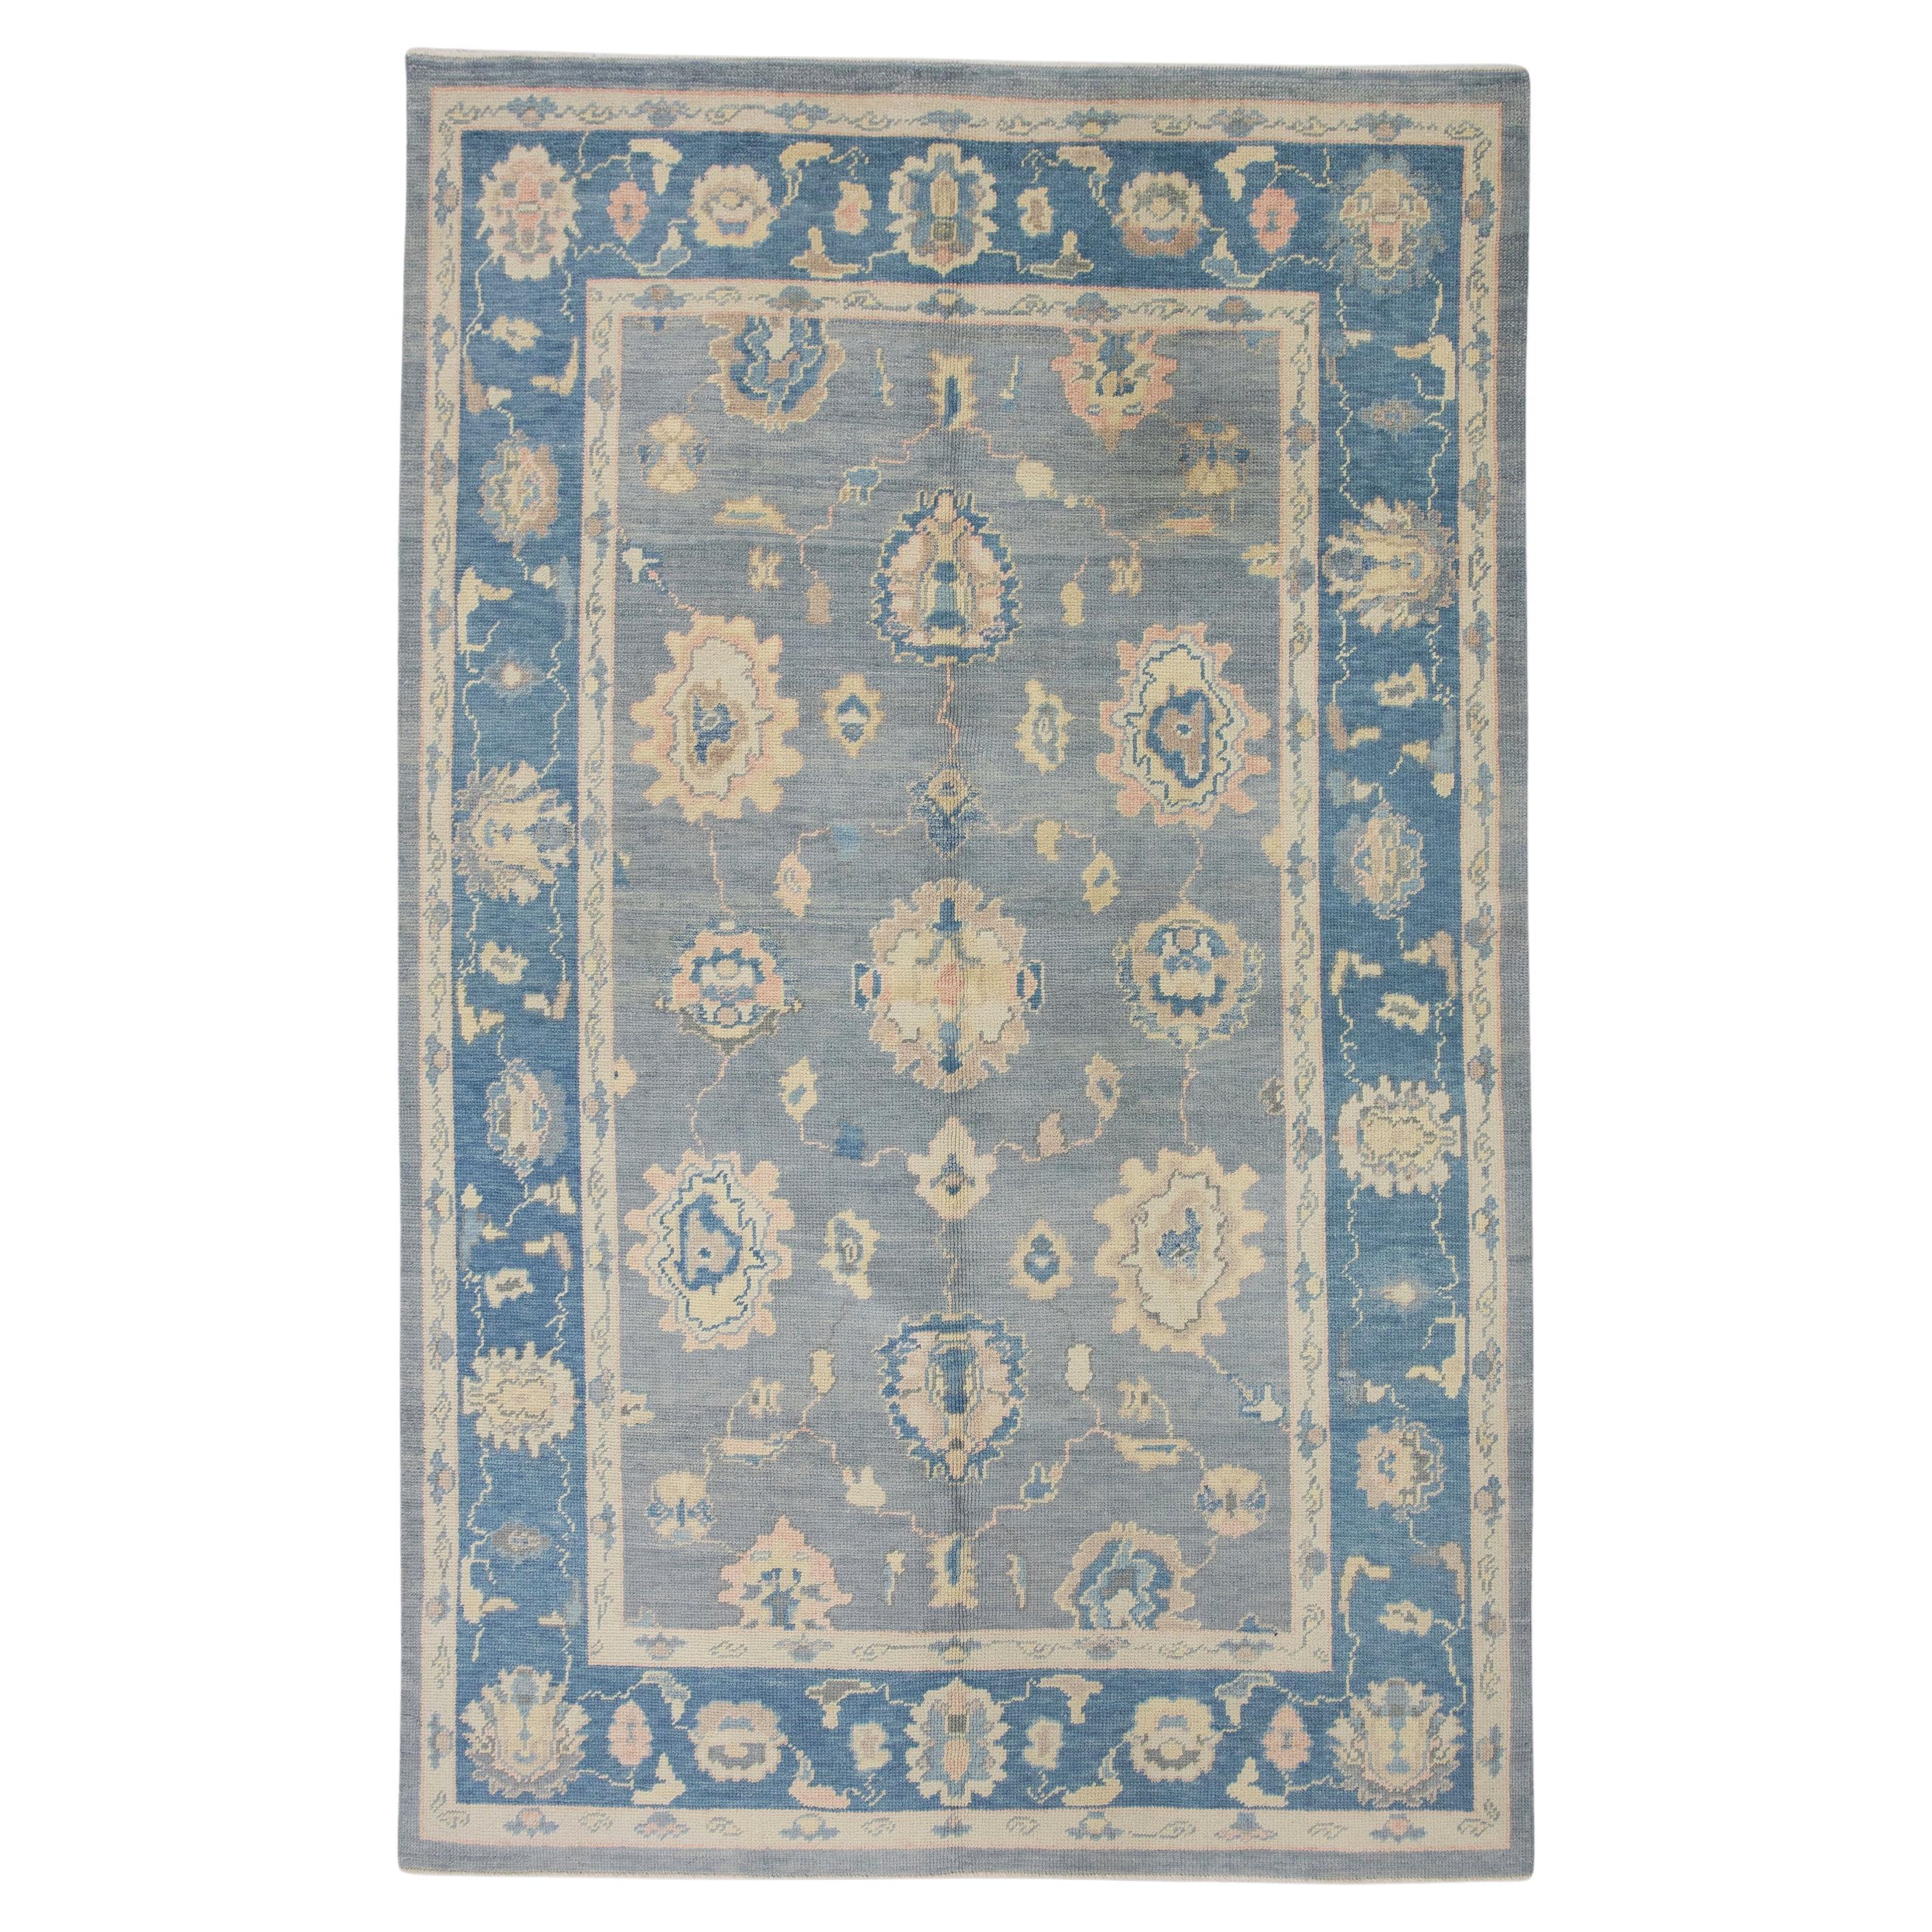 Blue and Pink Floral Handwoven Wool Turkish Oushak Rug 6'2" x 9'11" For Sale